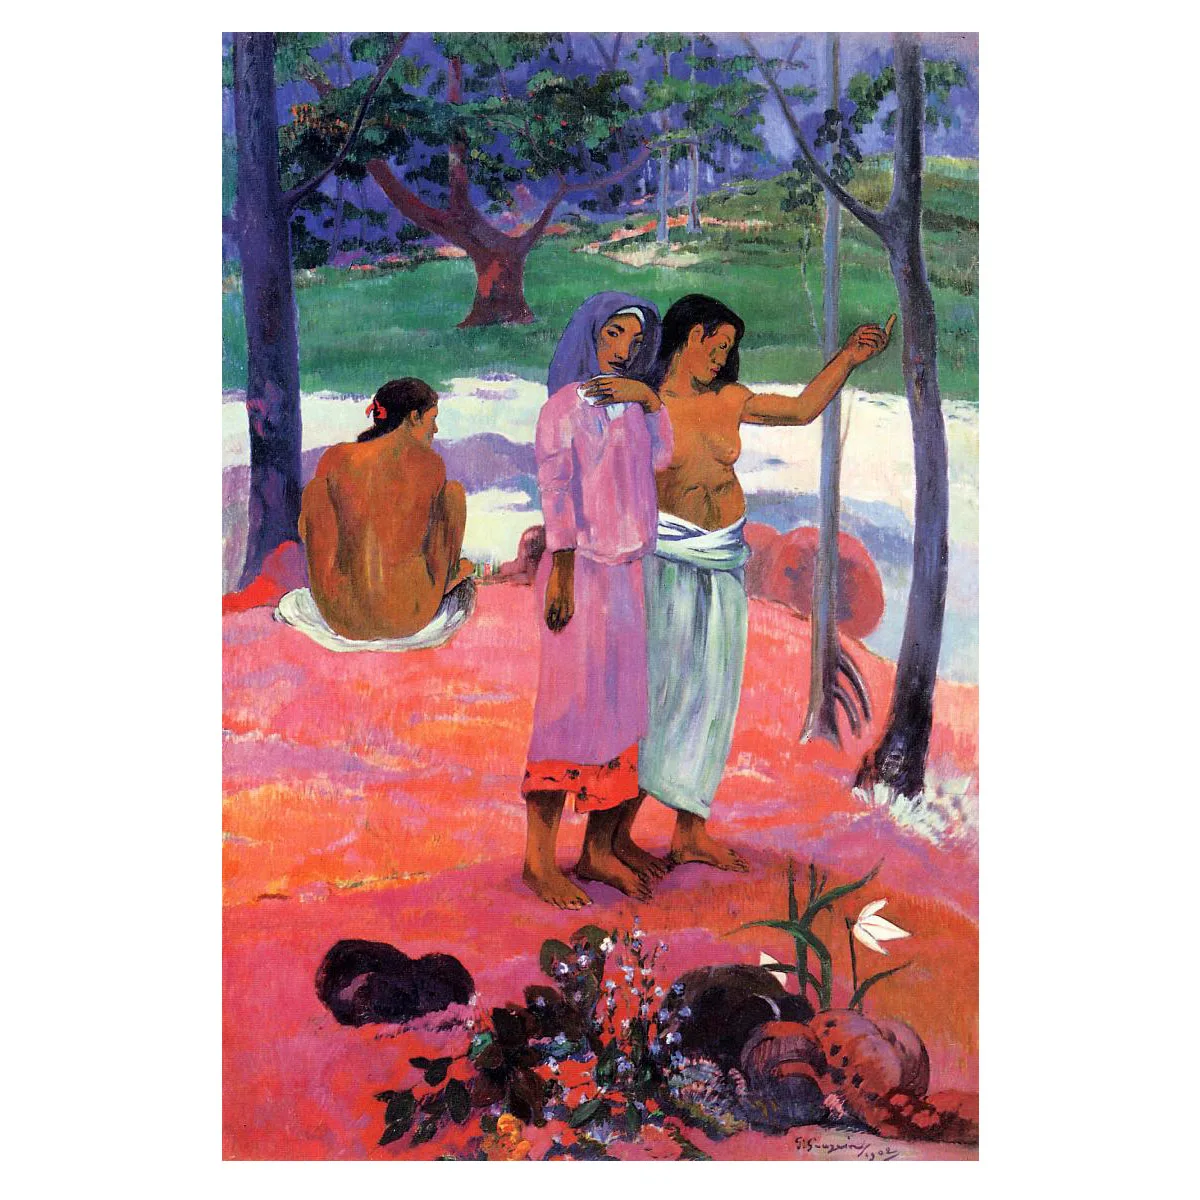 

The Call by Paul Gauguin Hand painted famous oil painting reproduction Modern wall art Home decor canvas free shipping